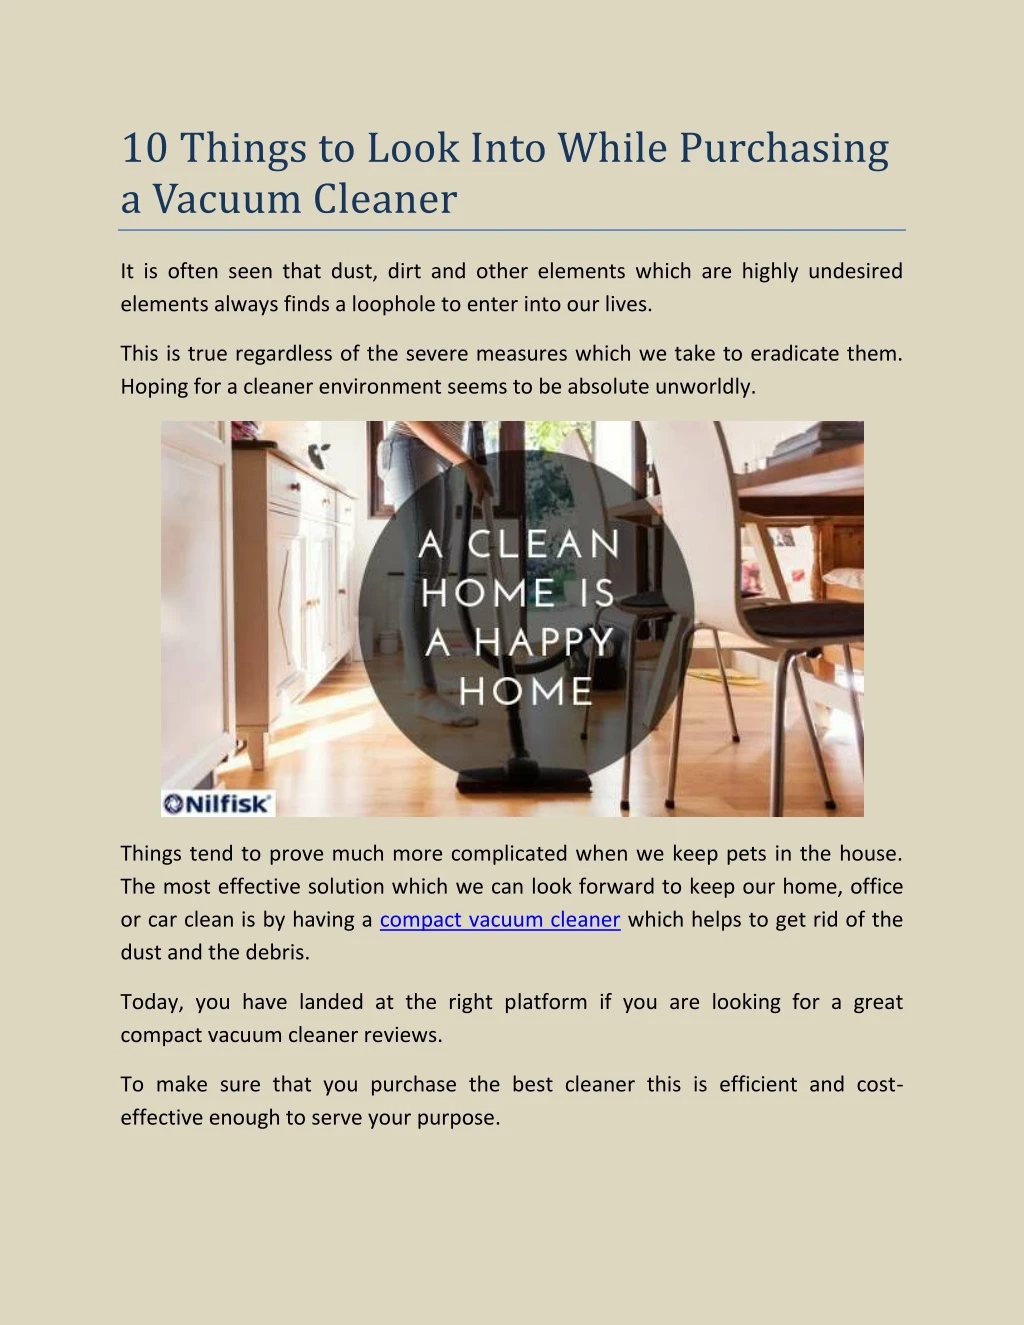 10 things to look into while purchasing a vacuum